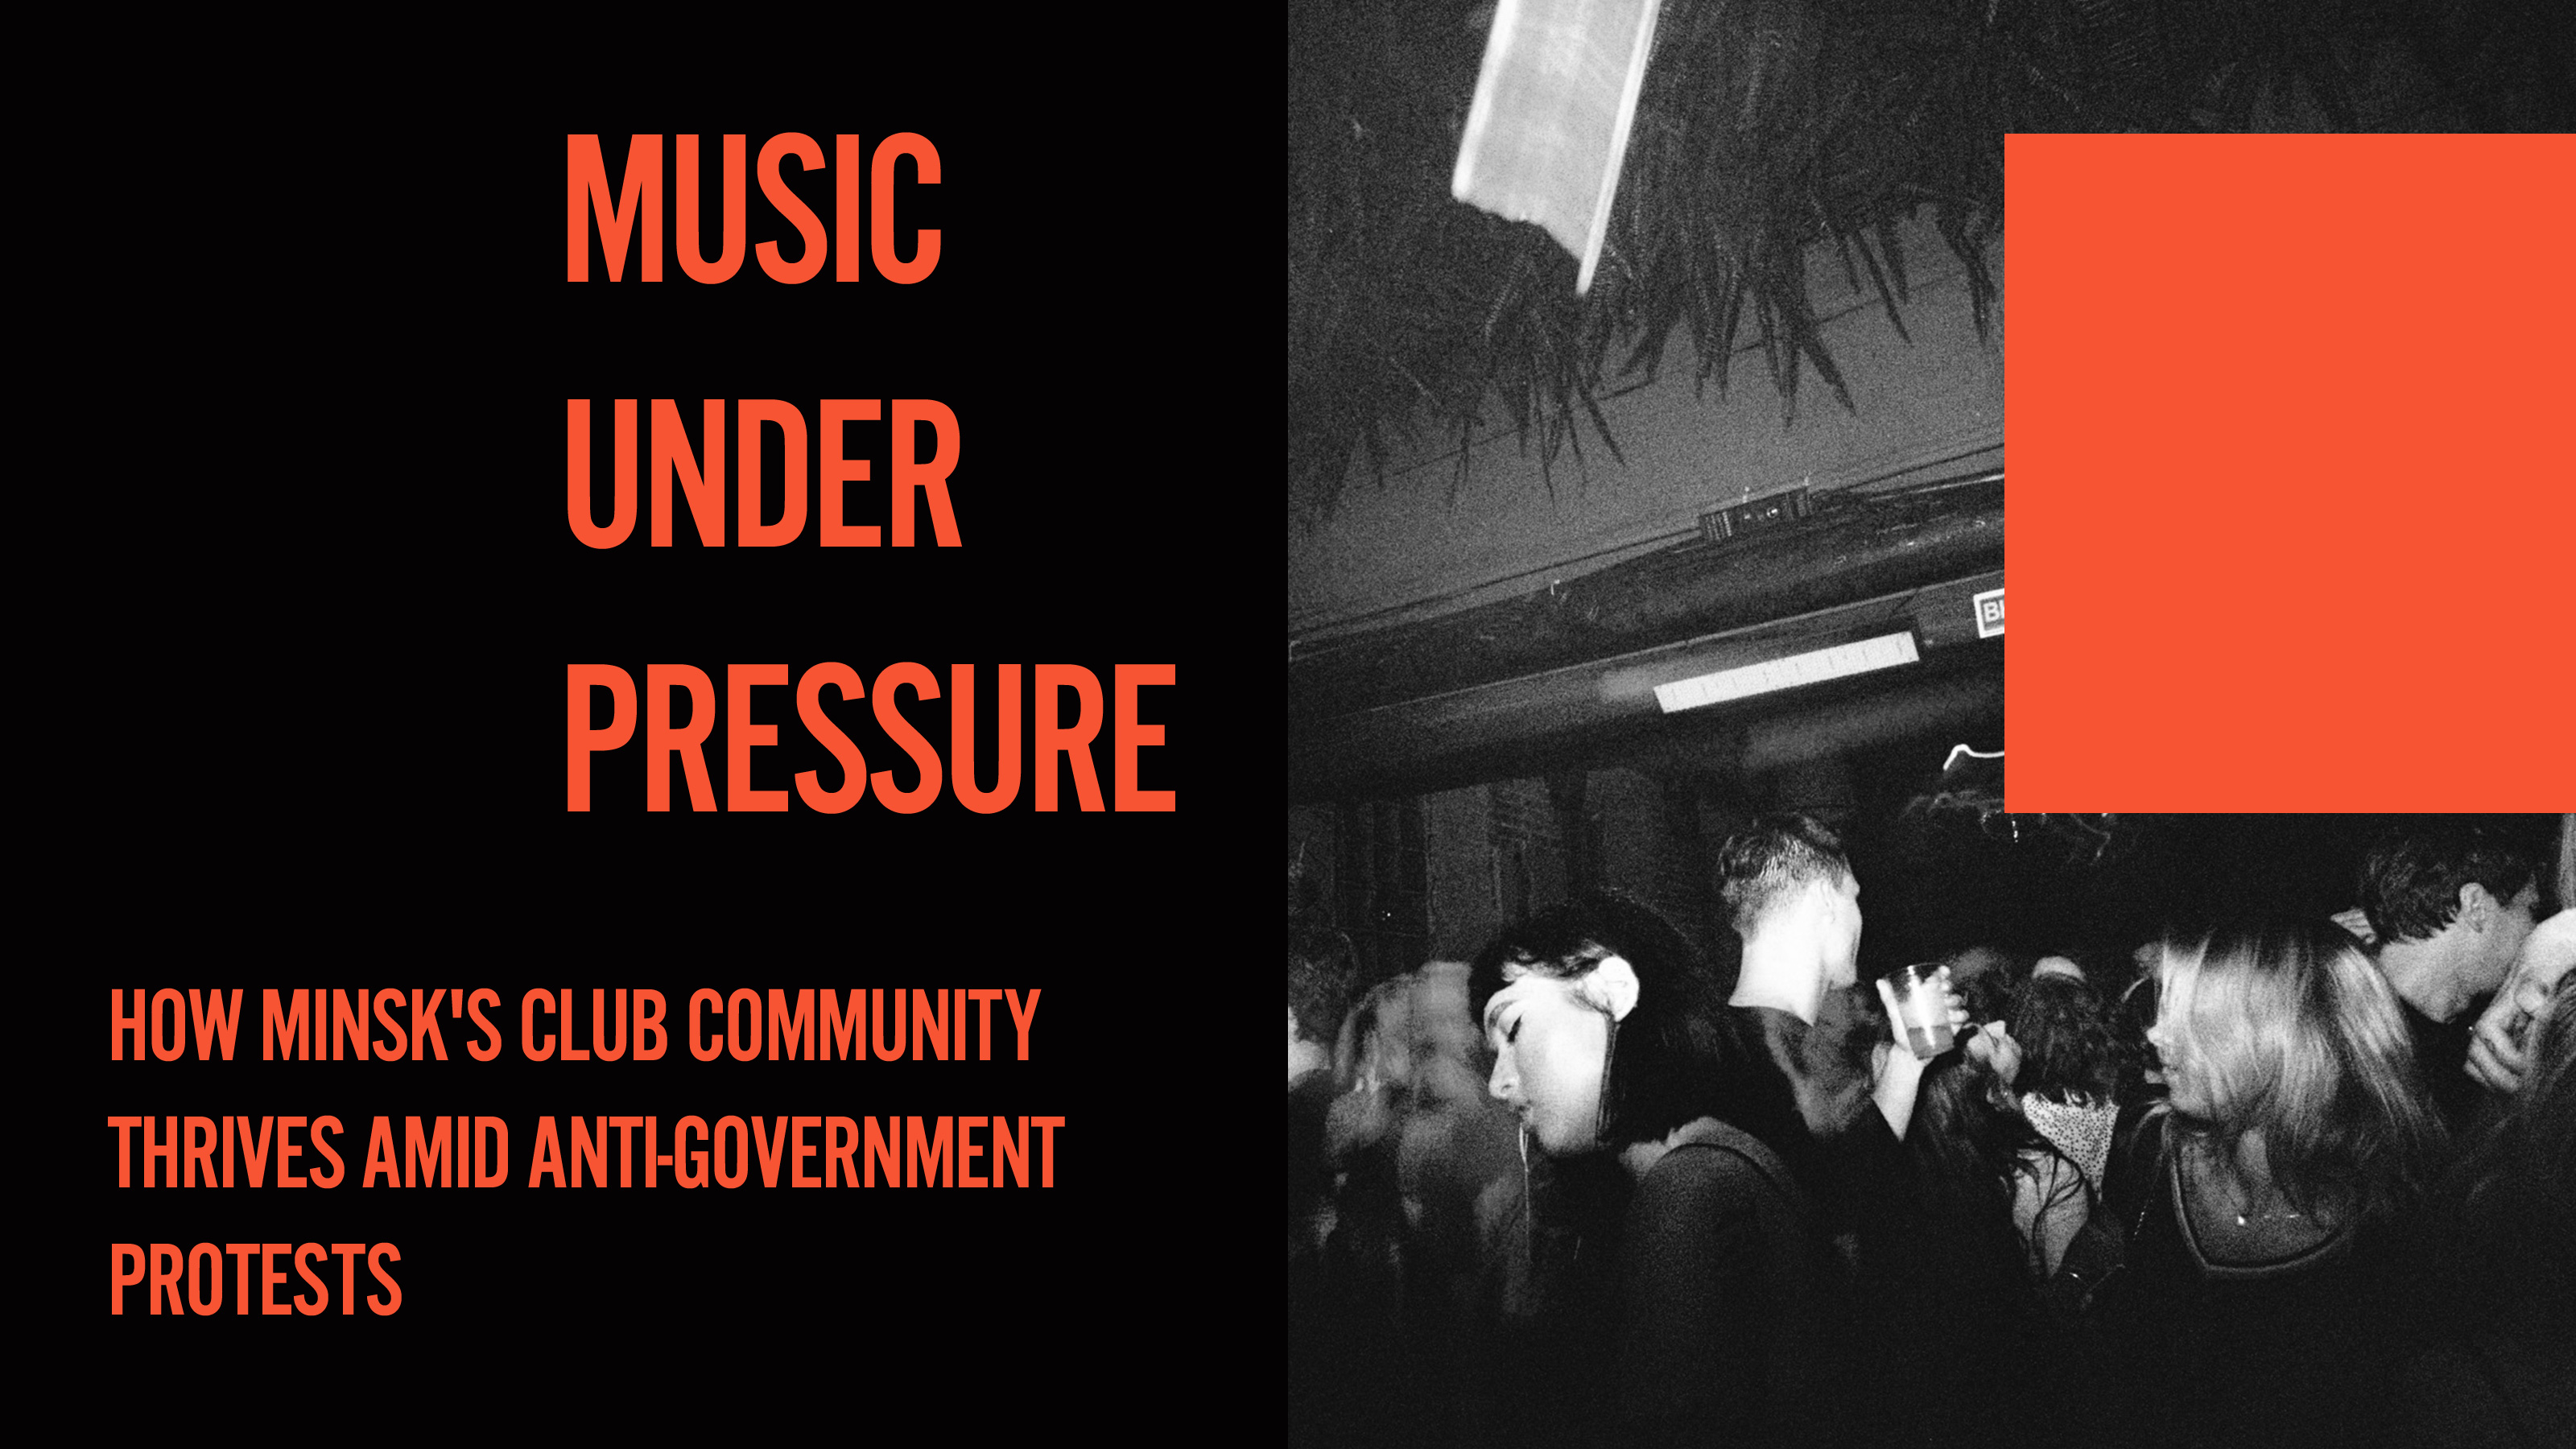 Music Under Pressure: How Minsk's Club Community Thrives Amid Anti-Government Protests